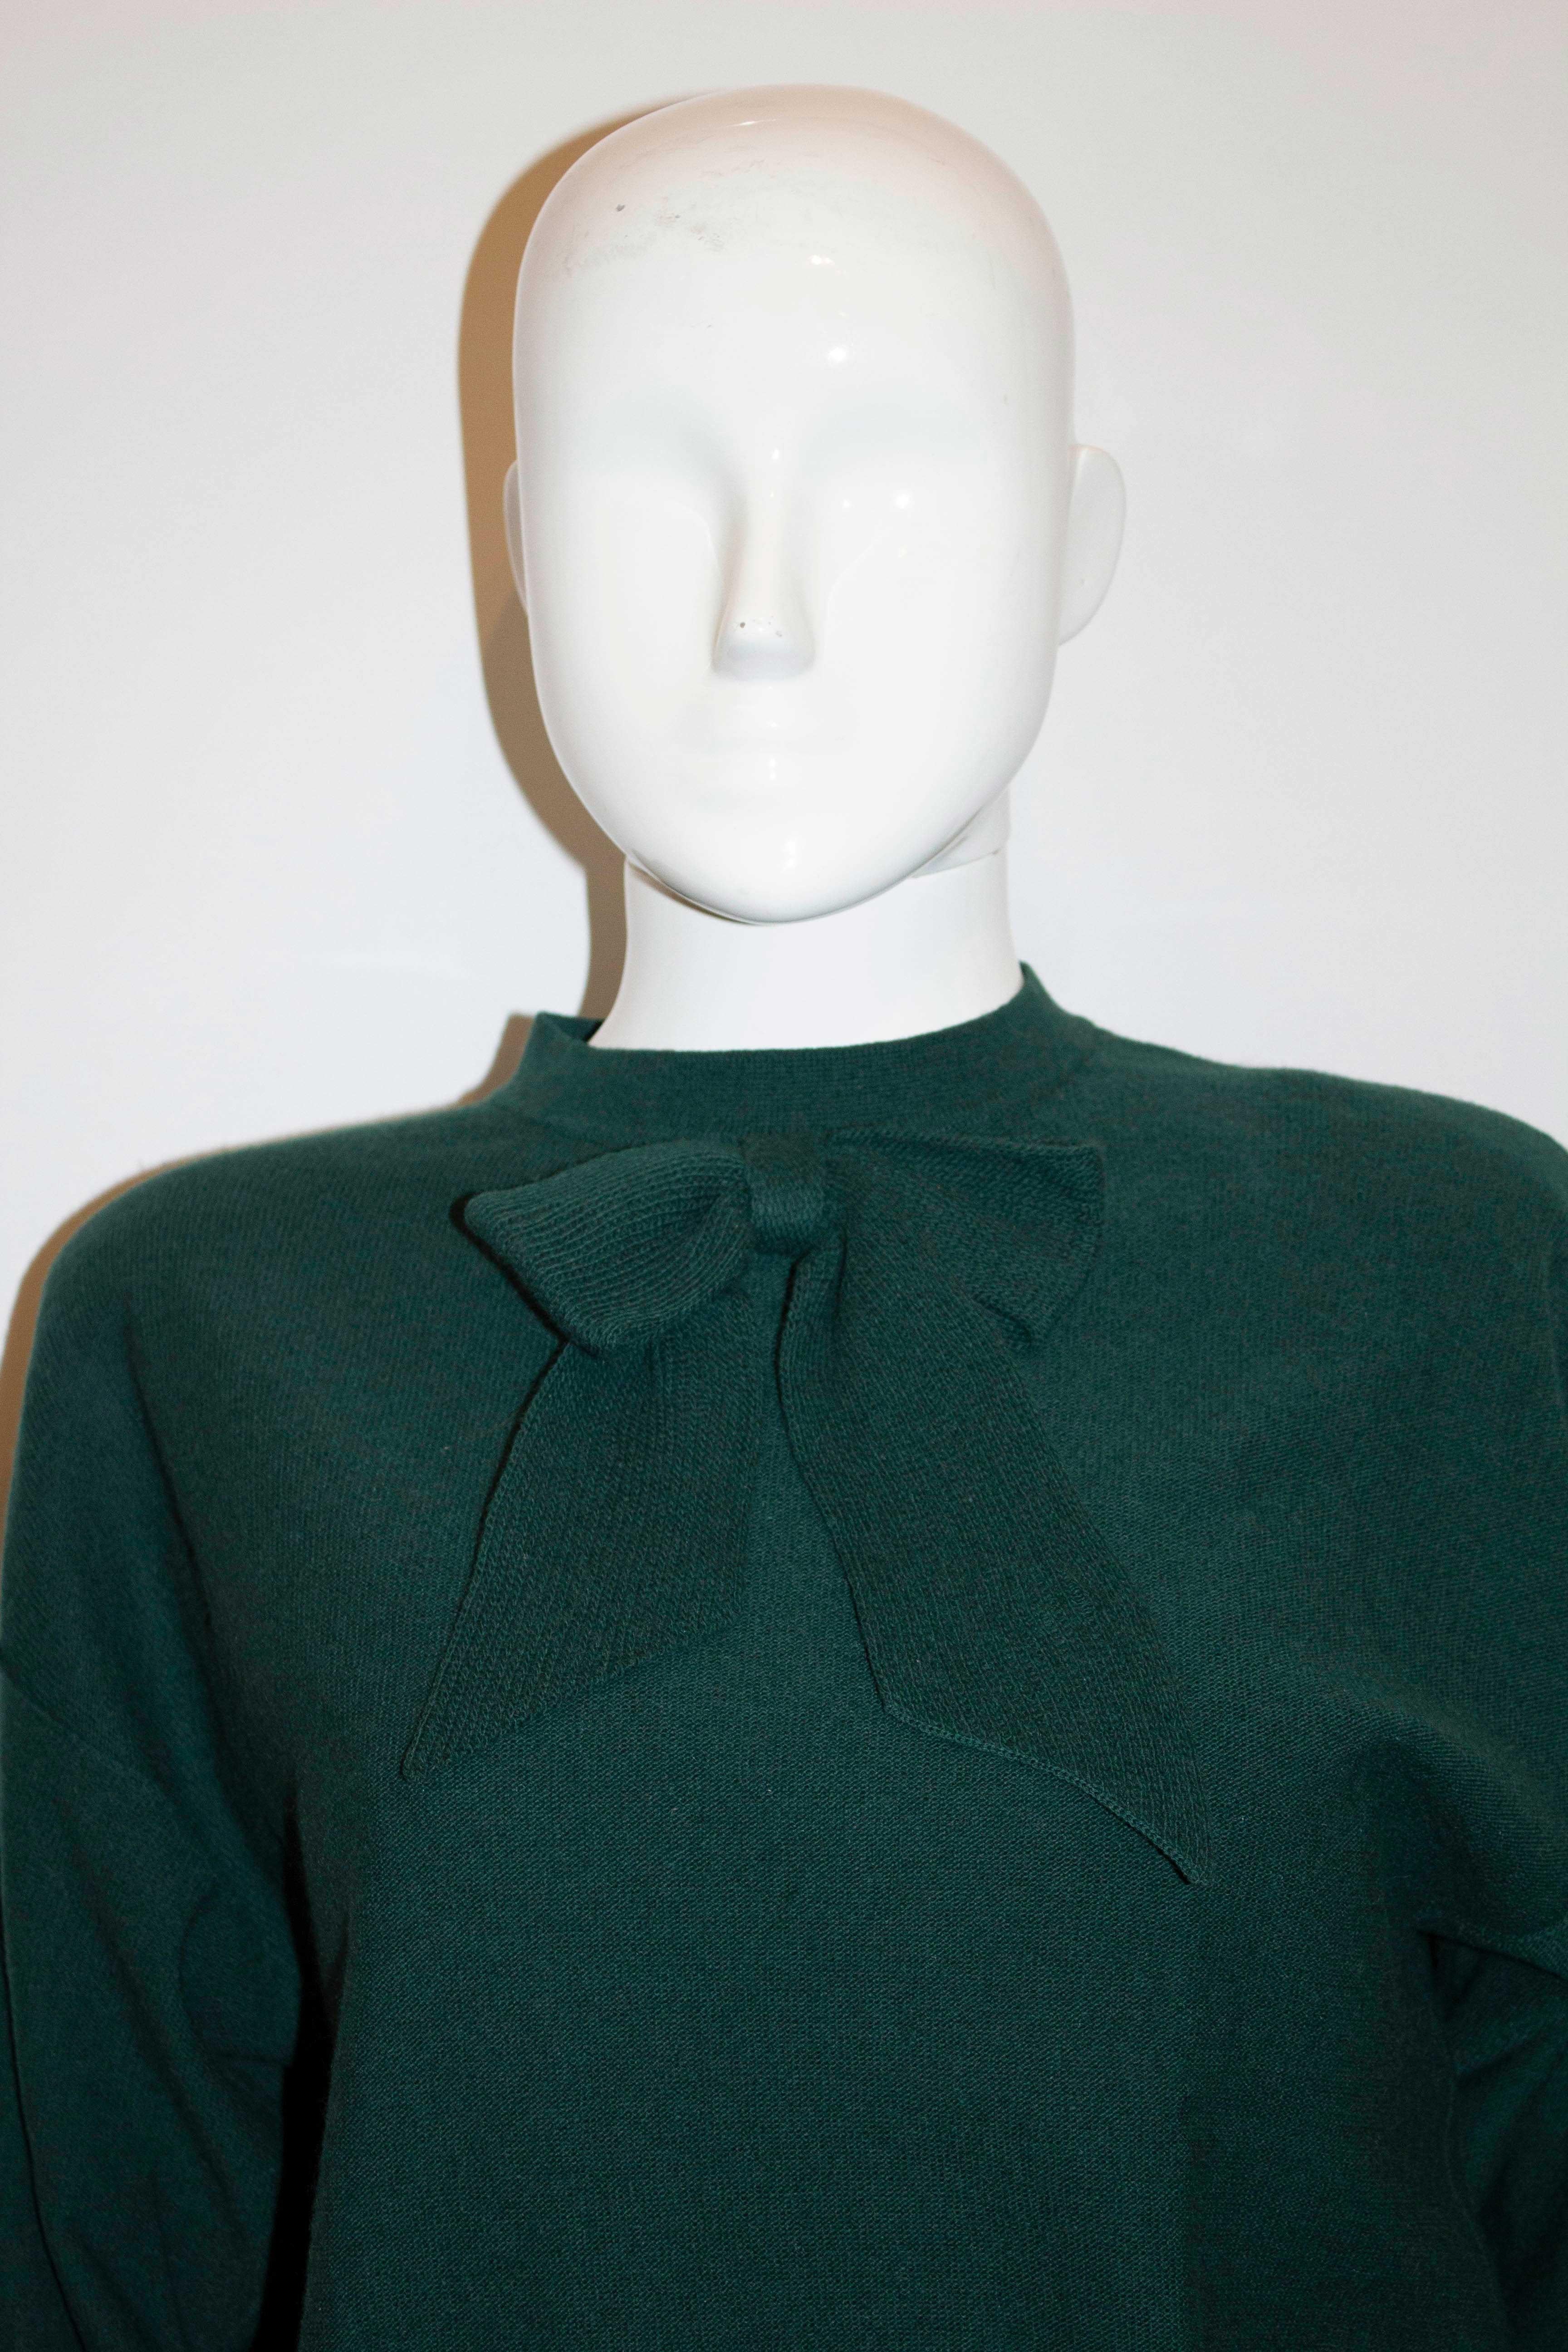 A great vintage green wool jumper by Sonia Rykiel mainline. The jumper is in a wonderful Christmas Tree green with a back popper opening, and a decorative knitted bow on the front. It has wide ribbing at the hem , ribbing on the cuffs and the